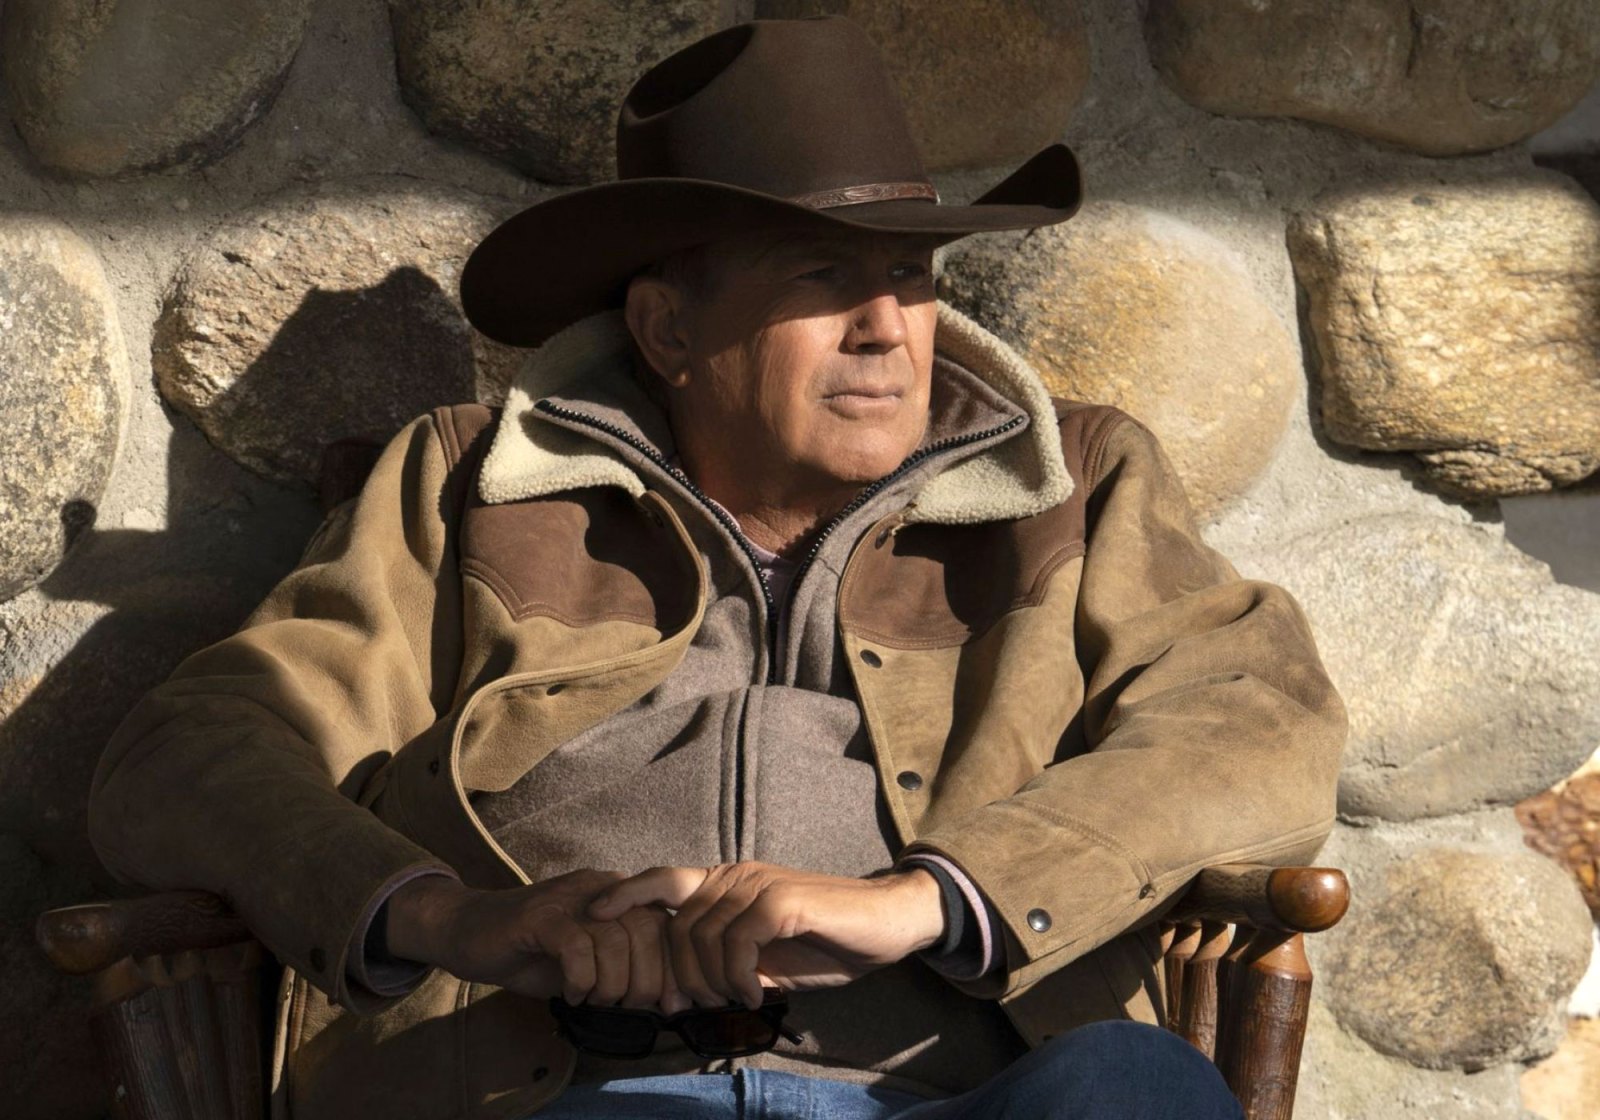 A Guide to 'Yellowstone' and Its Many Spinoffs